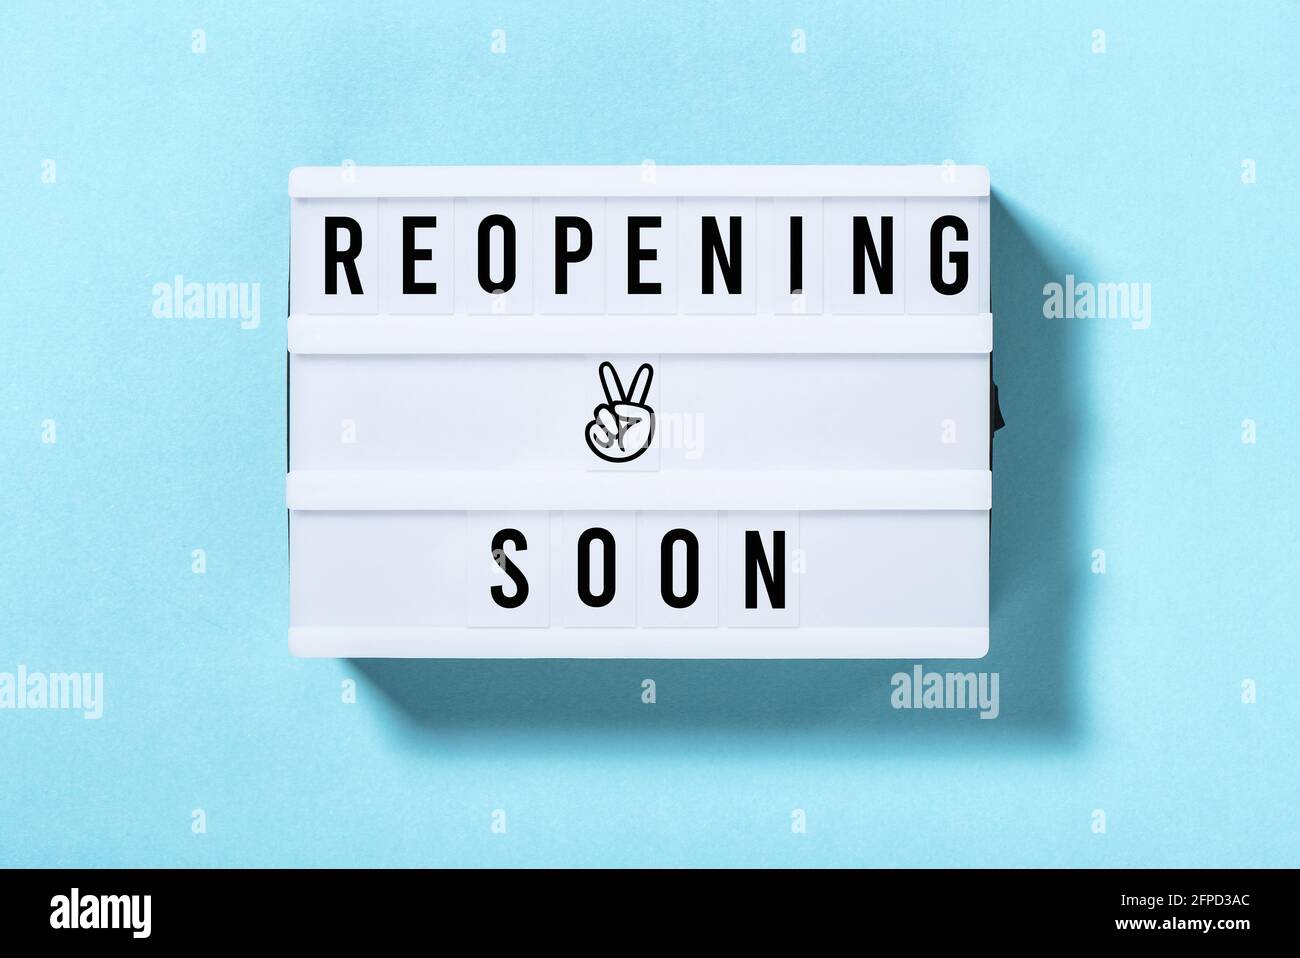 Reopening soon. Light box with text on blue background Stock Photo